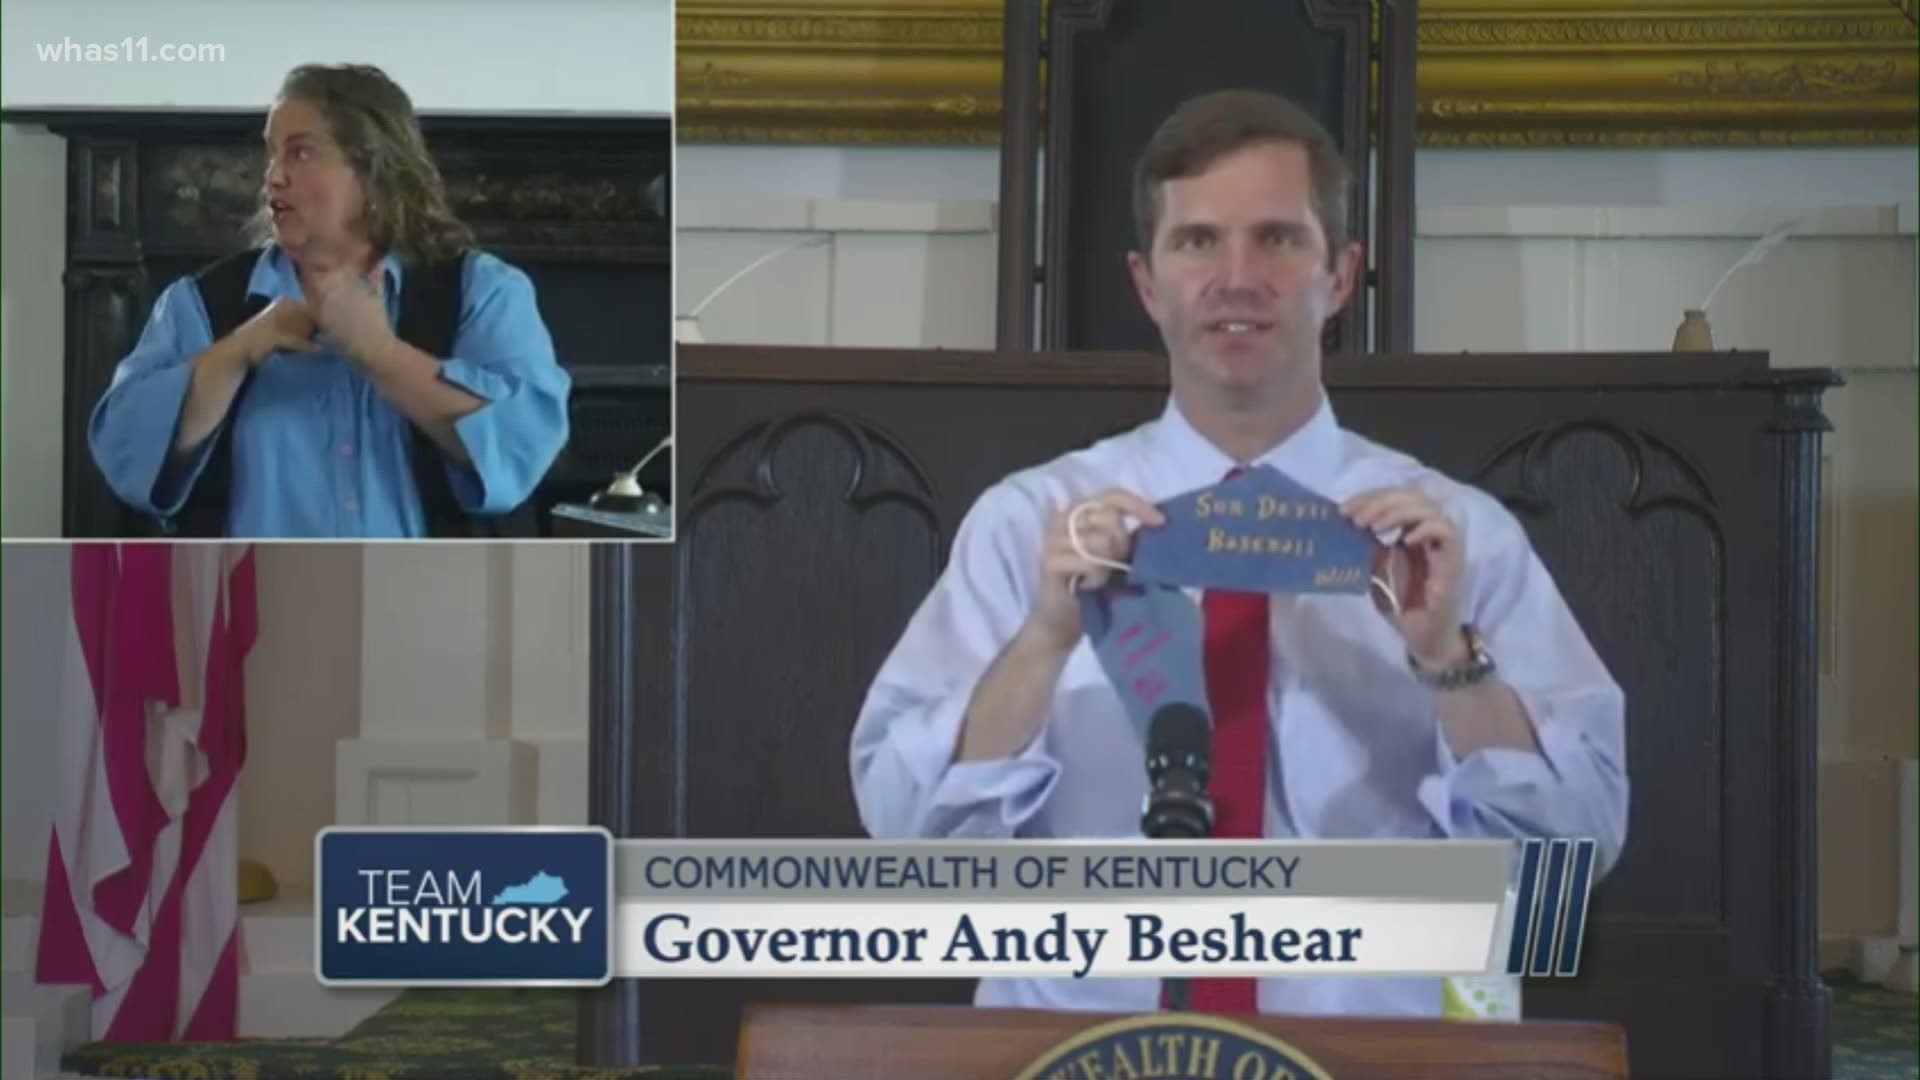 During his weekly COVID-19 briefing, Gov. Andy Beshear urged people to wear masks to prevent the spread of the virus, saying everyone has the responsibility.